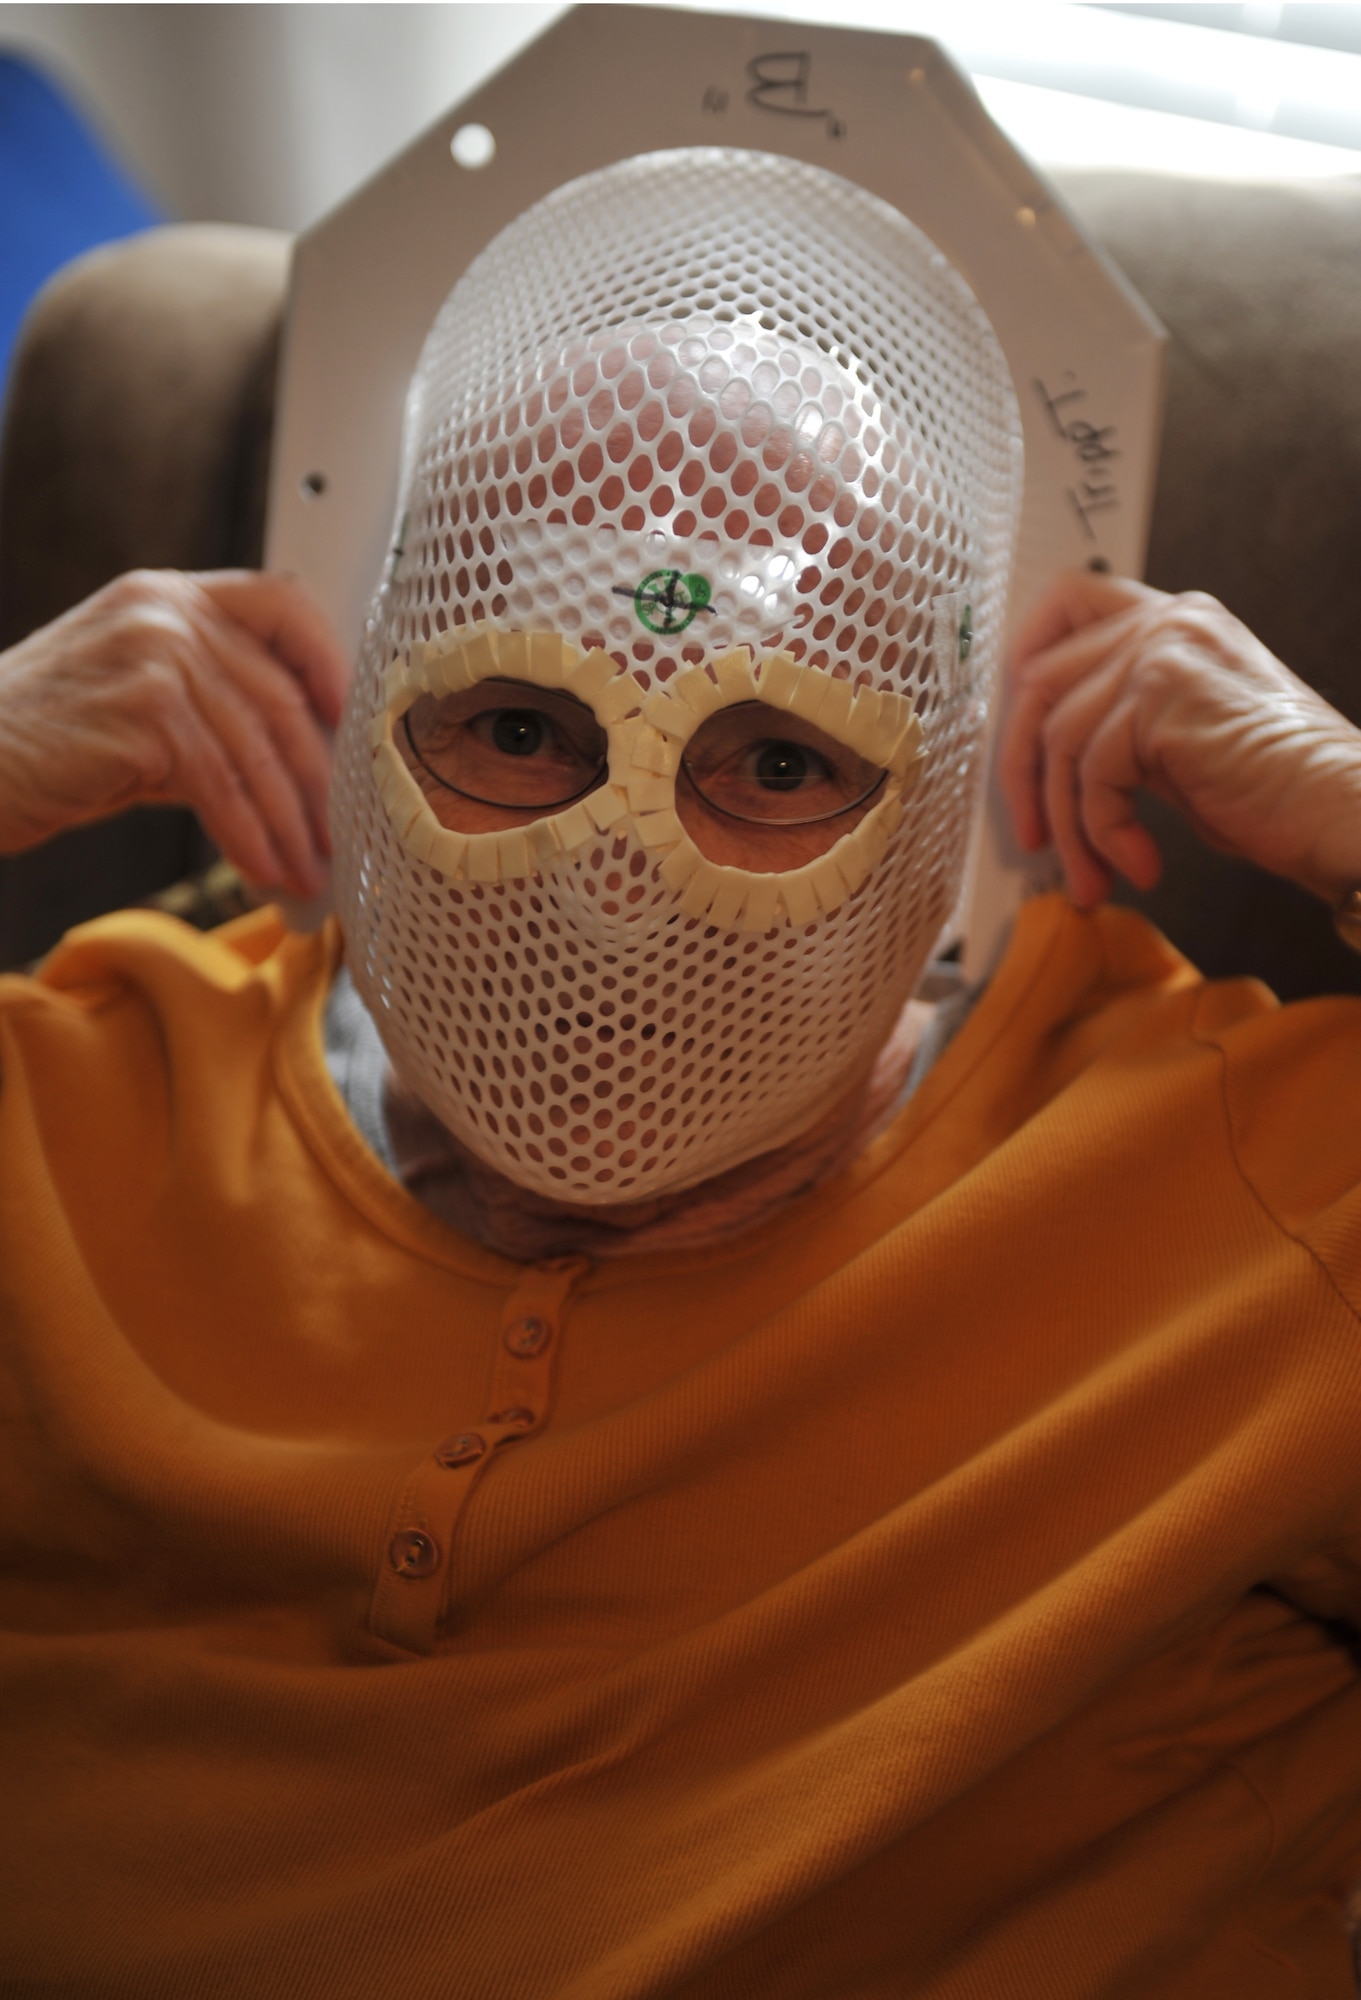 KNOB NOSTER, Mo. -- June Tripp, small cell cancer survivor, demonstrates the radiation mask she used during her radiation therapy, Feb. 19. June endured 15 days of radiation treatments to help shrink tumors and kill cancer cells. (U.S. Air Force photo/Heidi Hunt)